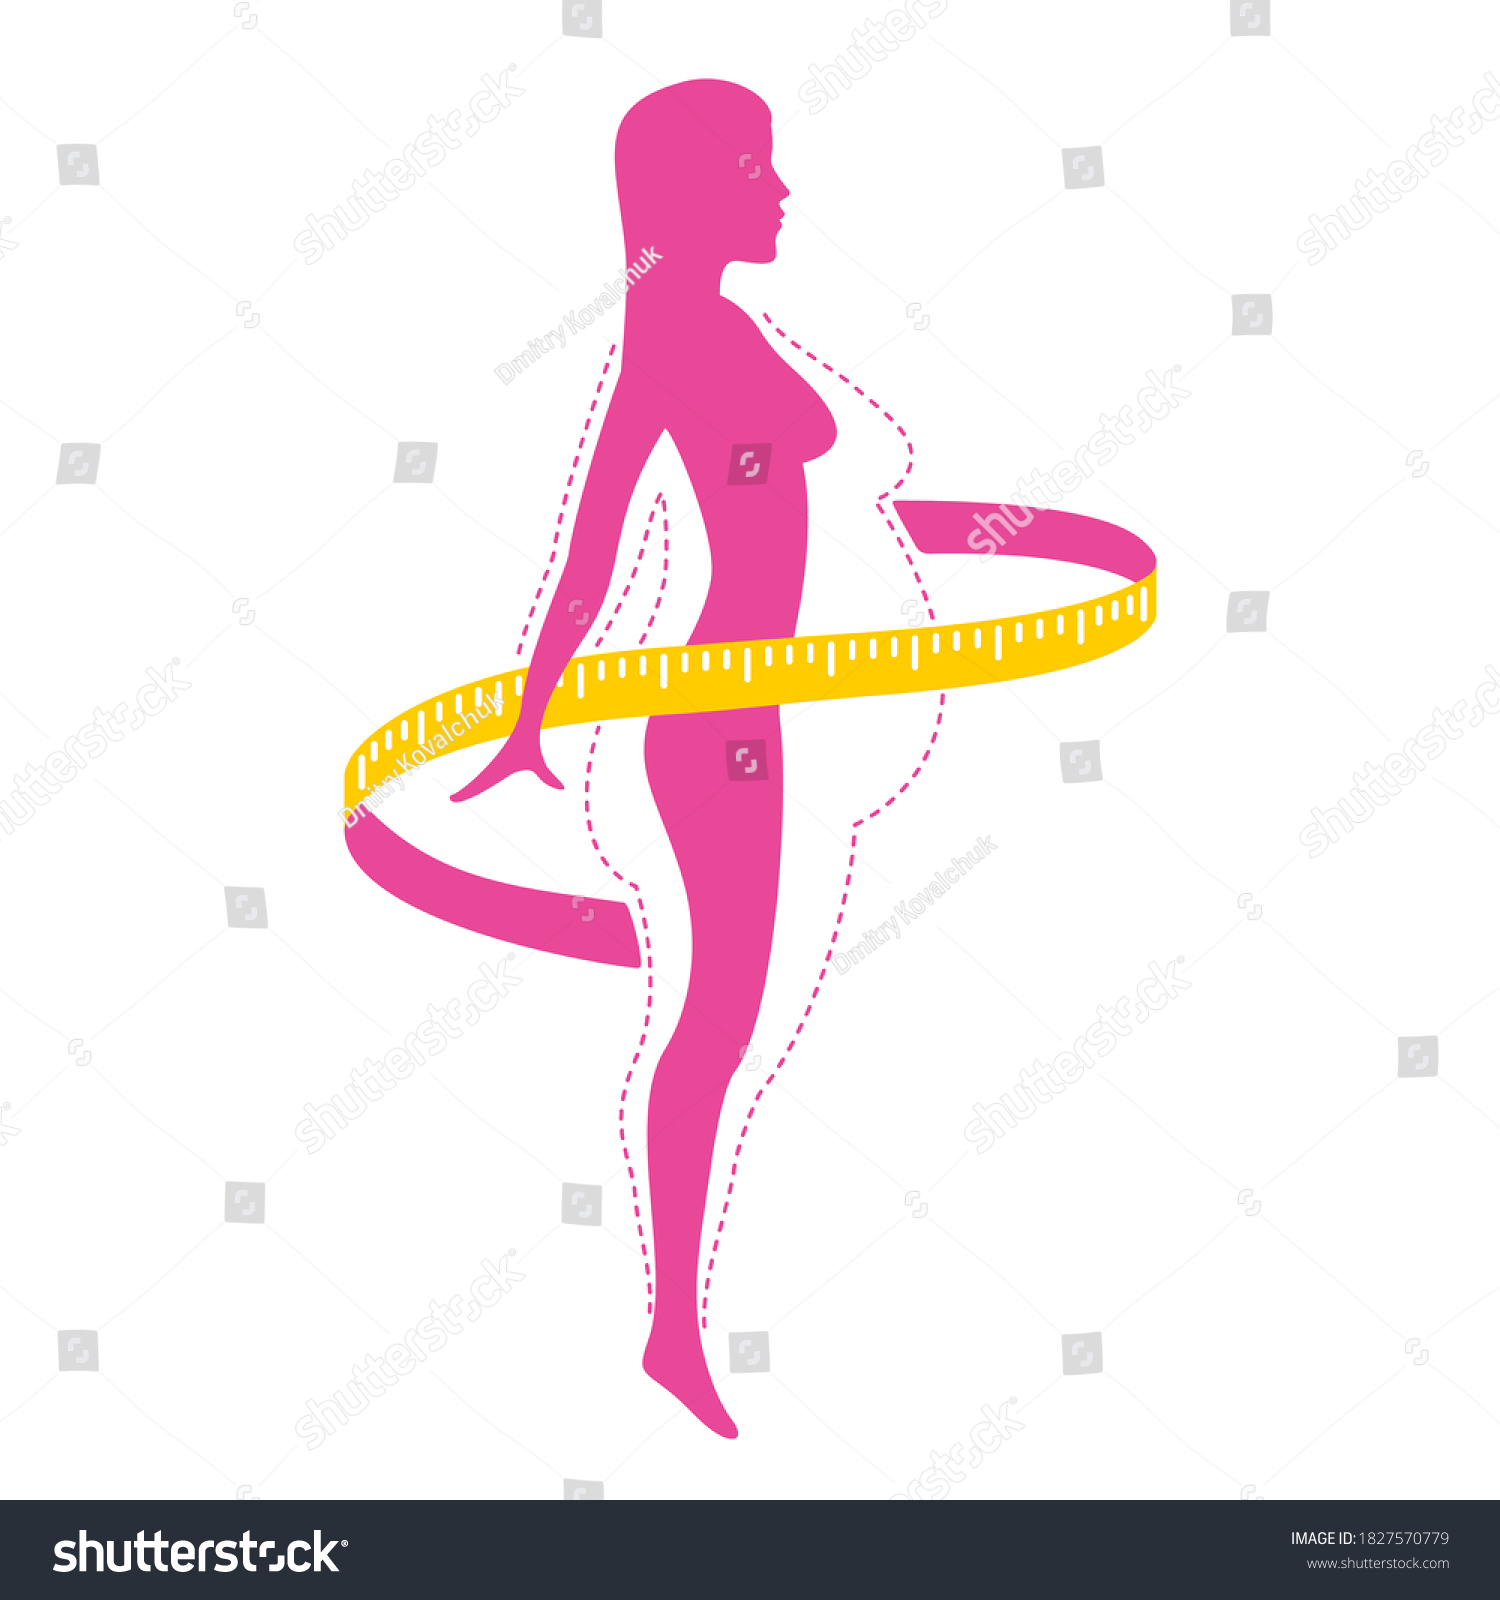 Weight loss program logo (isolated icon) - female silhouette with fat and slim body comparsion and measuring tape around #1827570779